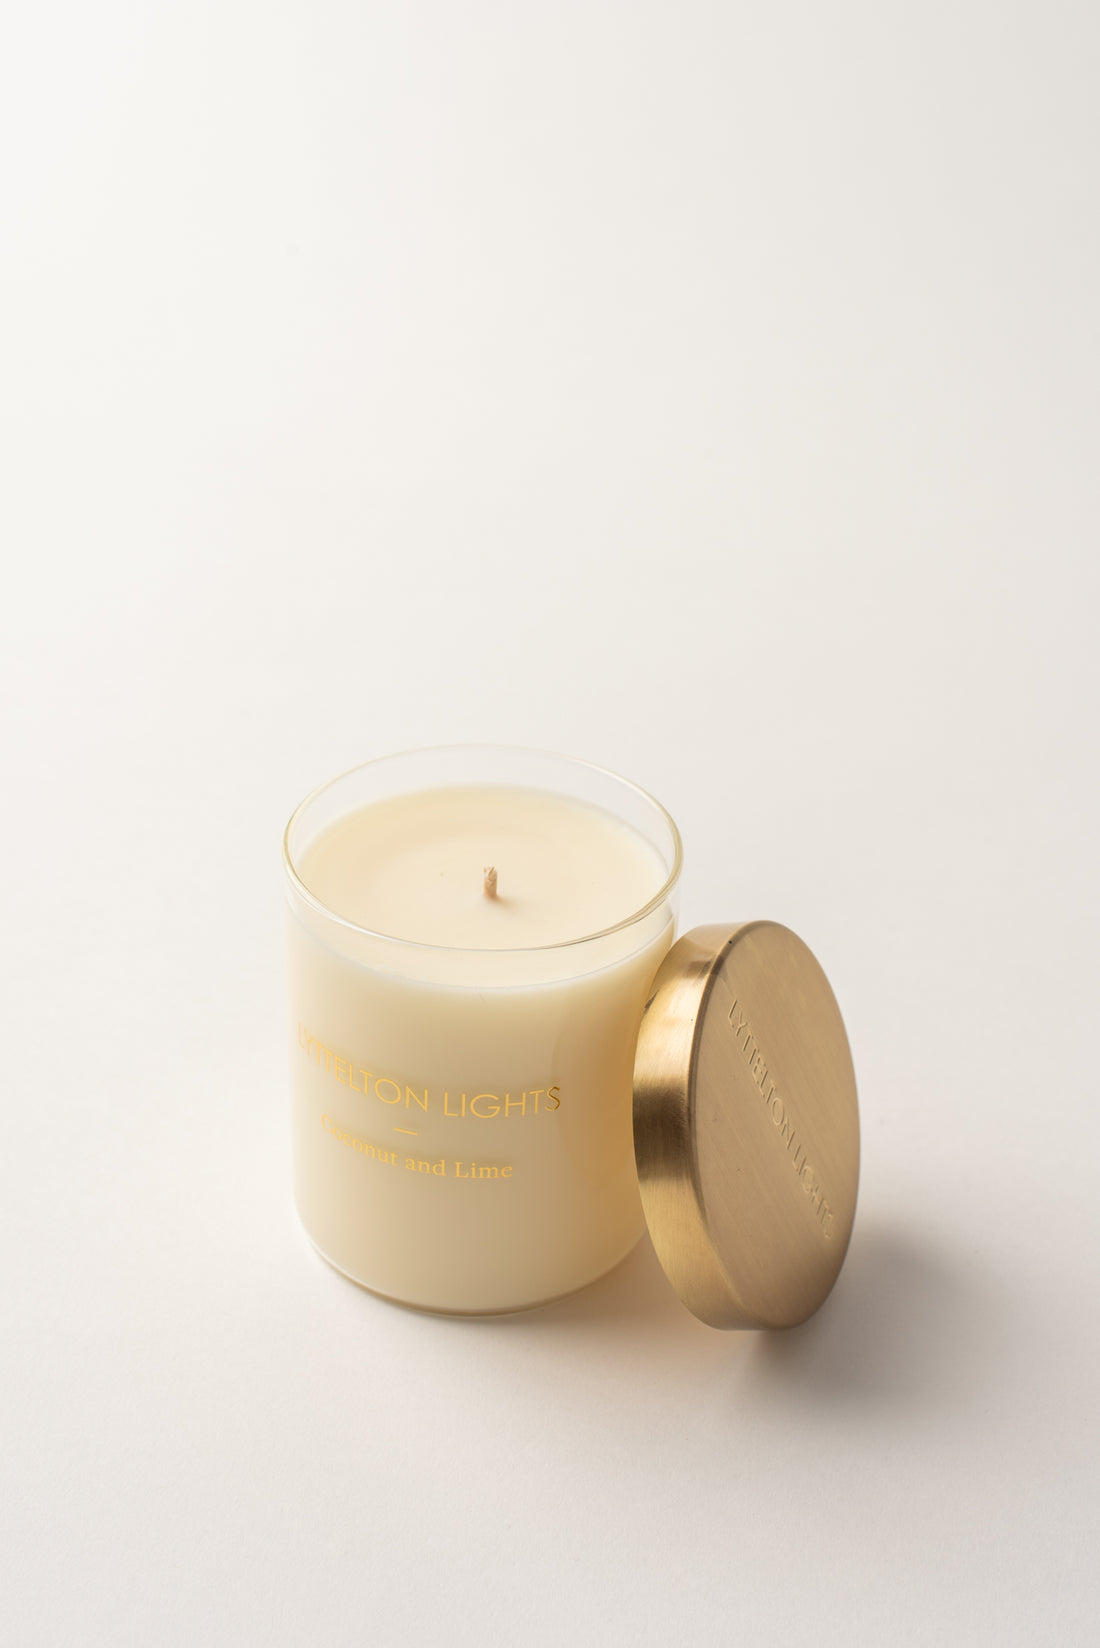 Fig and Apple Blossom Candle